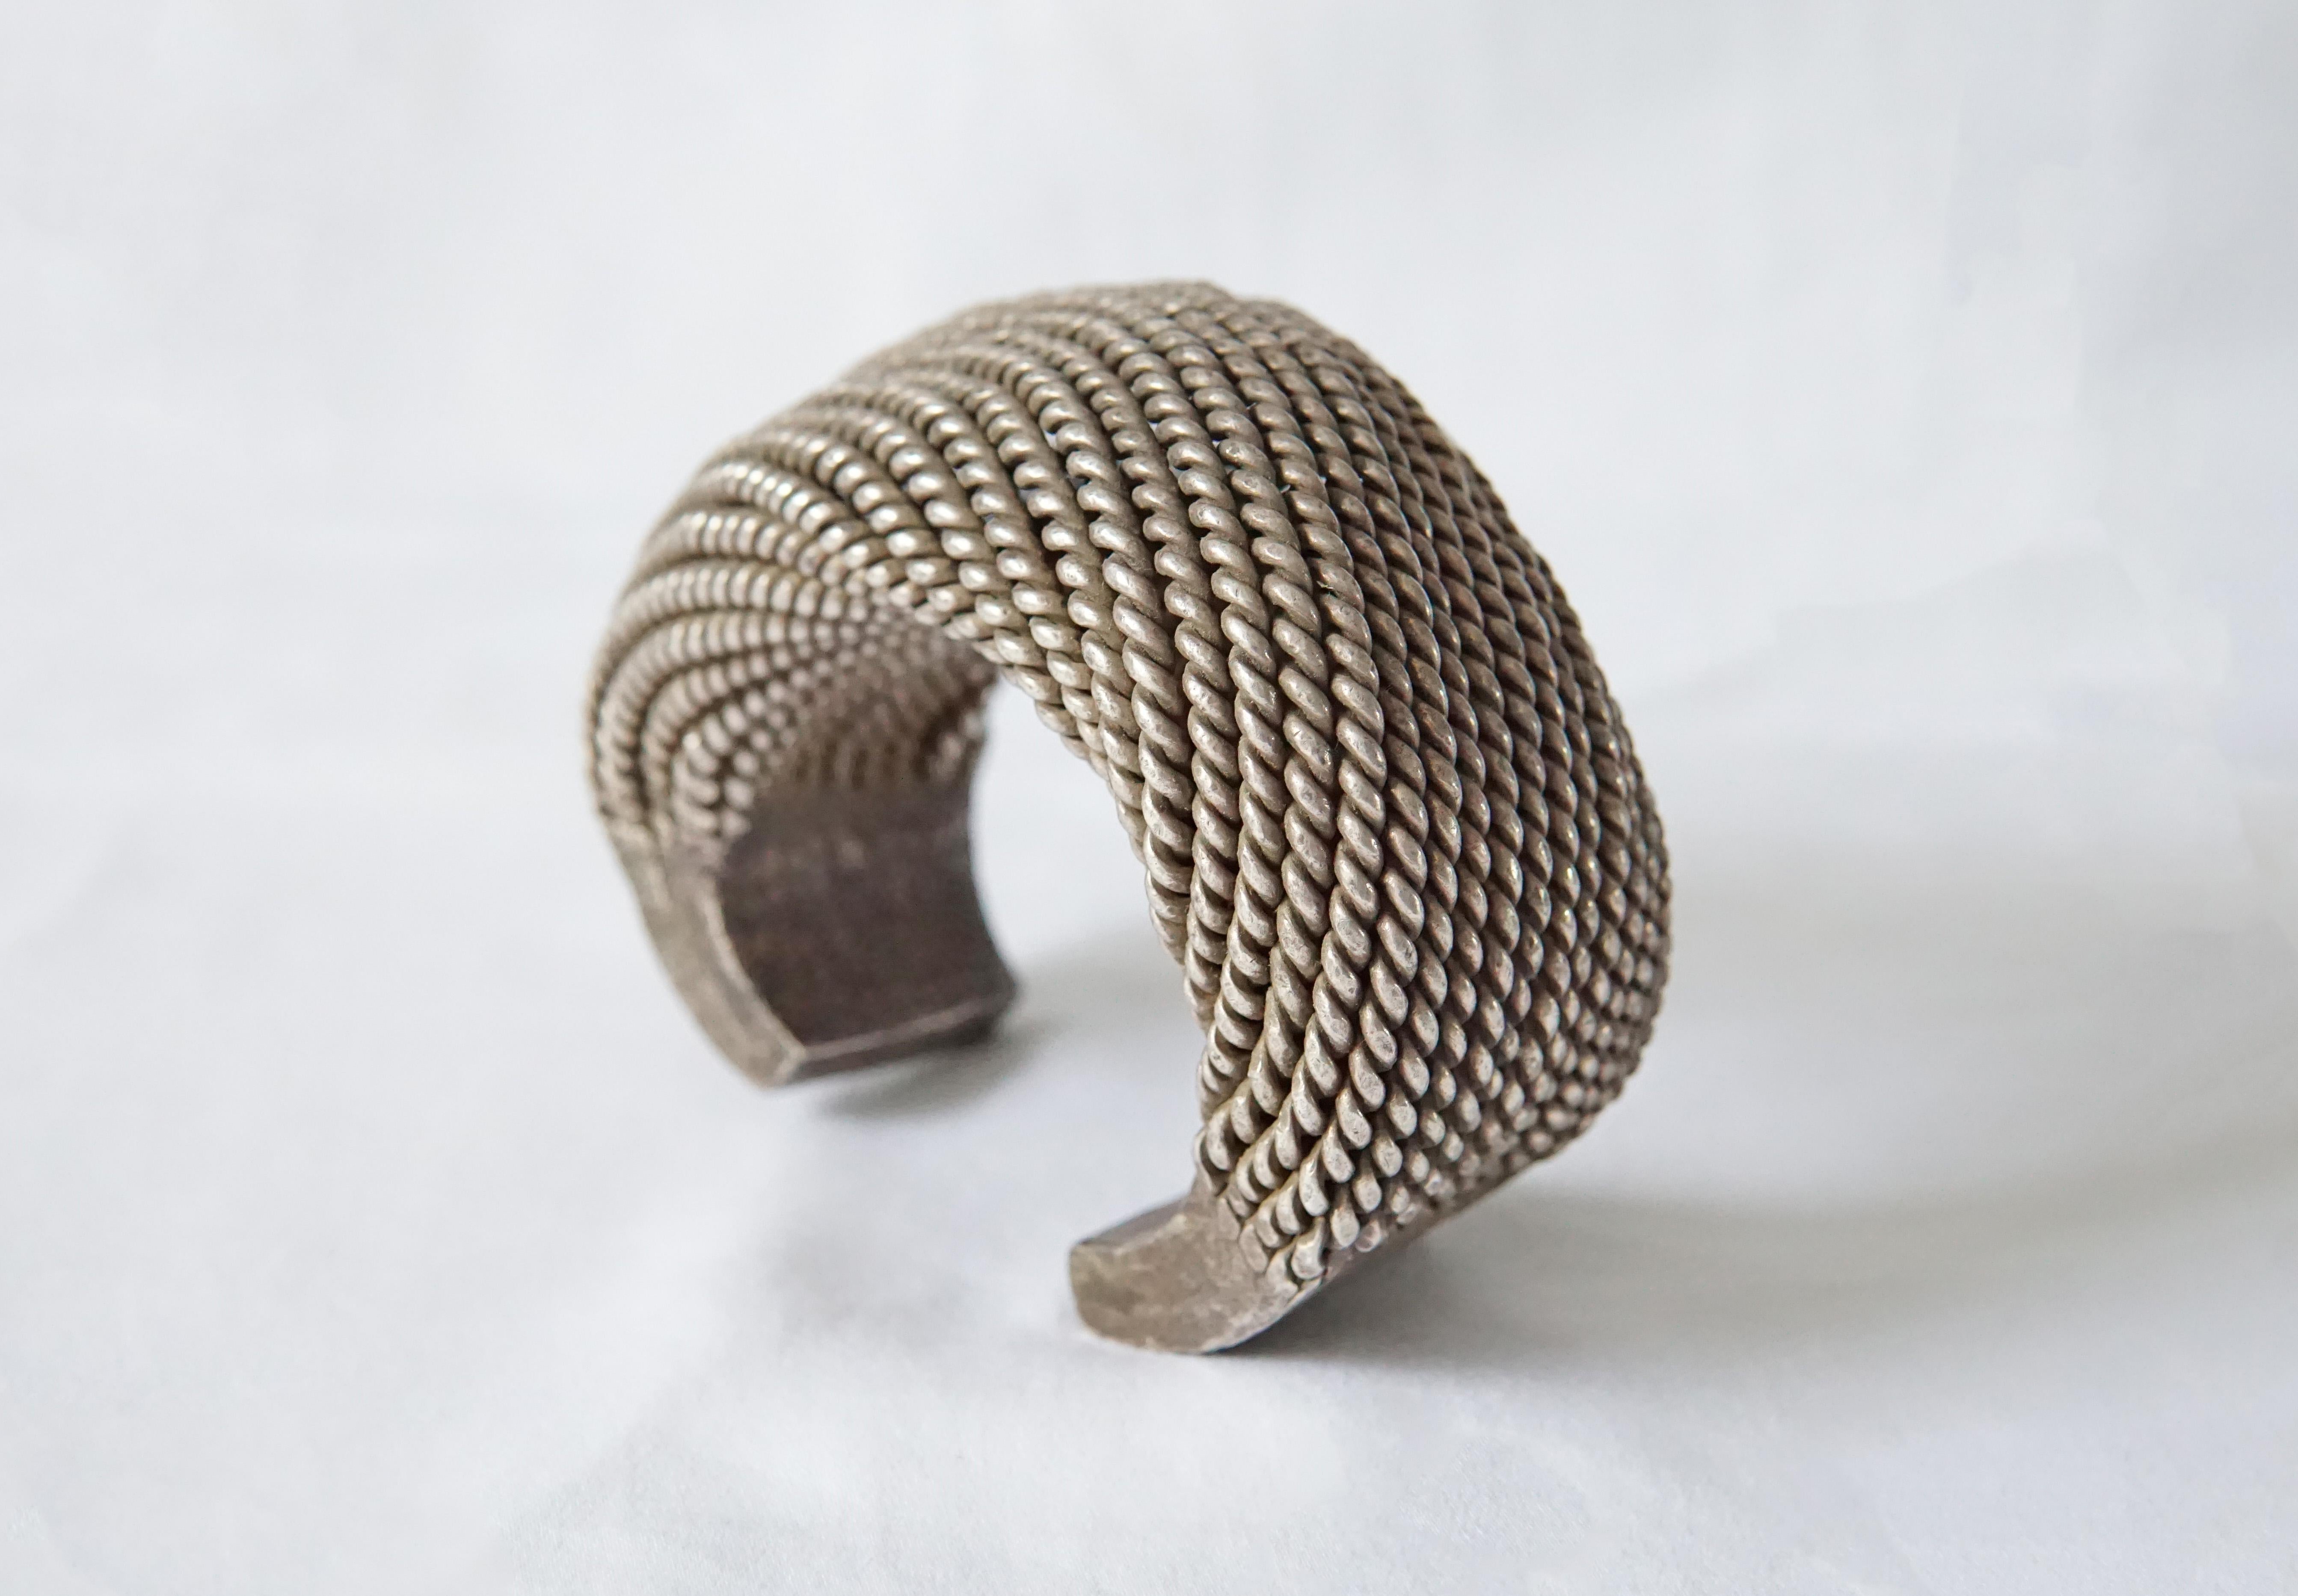 An exceptionally large Akha Tribe woven silver bracelet with spiral design. This Tribal bracelet encompasses tradition Hill tribe silversmithing techniques with each silver strand crafted and woven by hand. This bracelet is slightly adjustable to